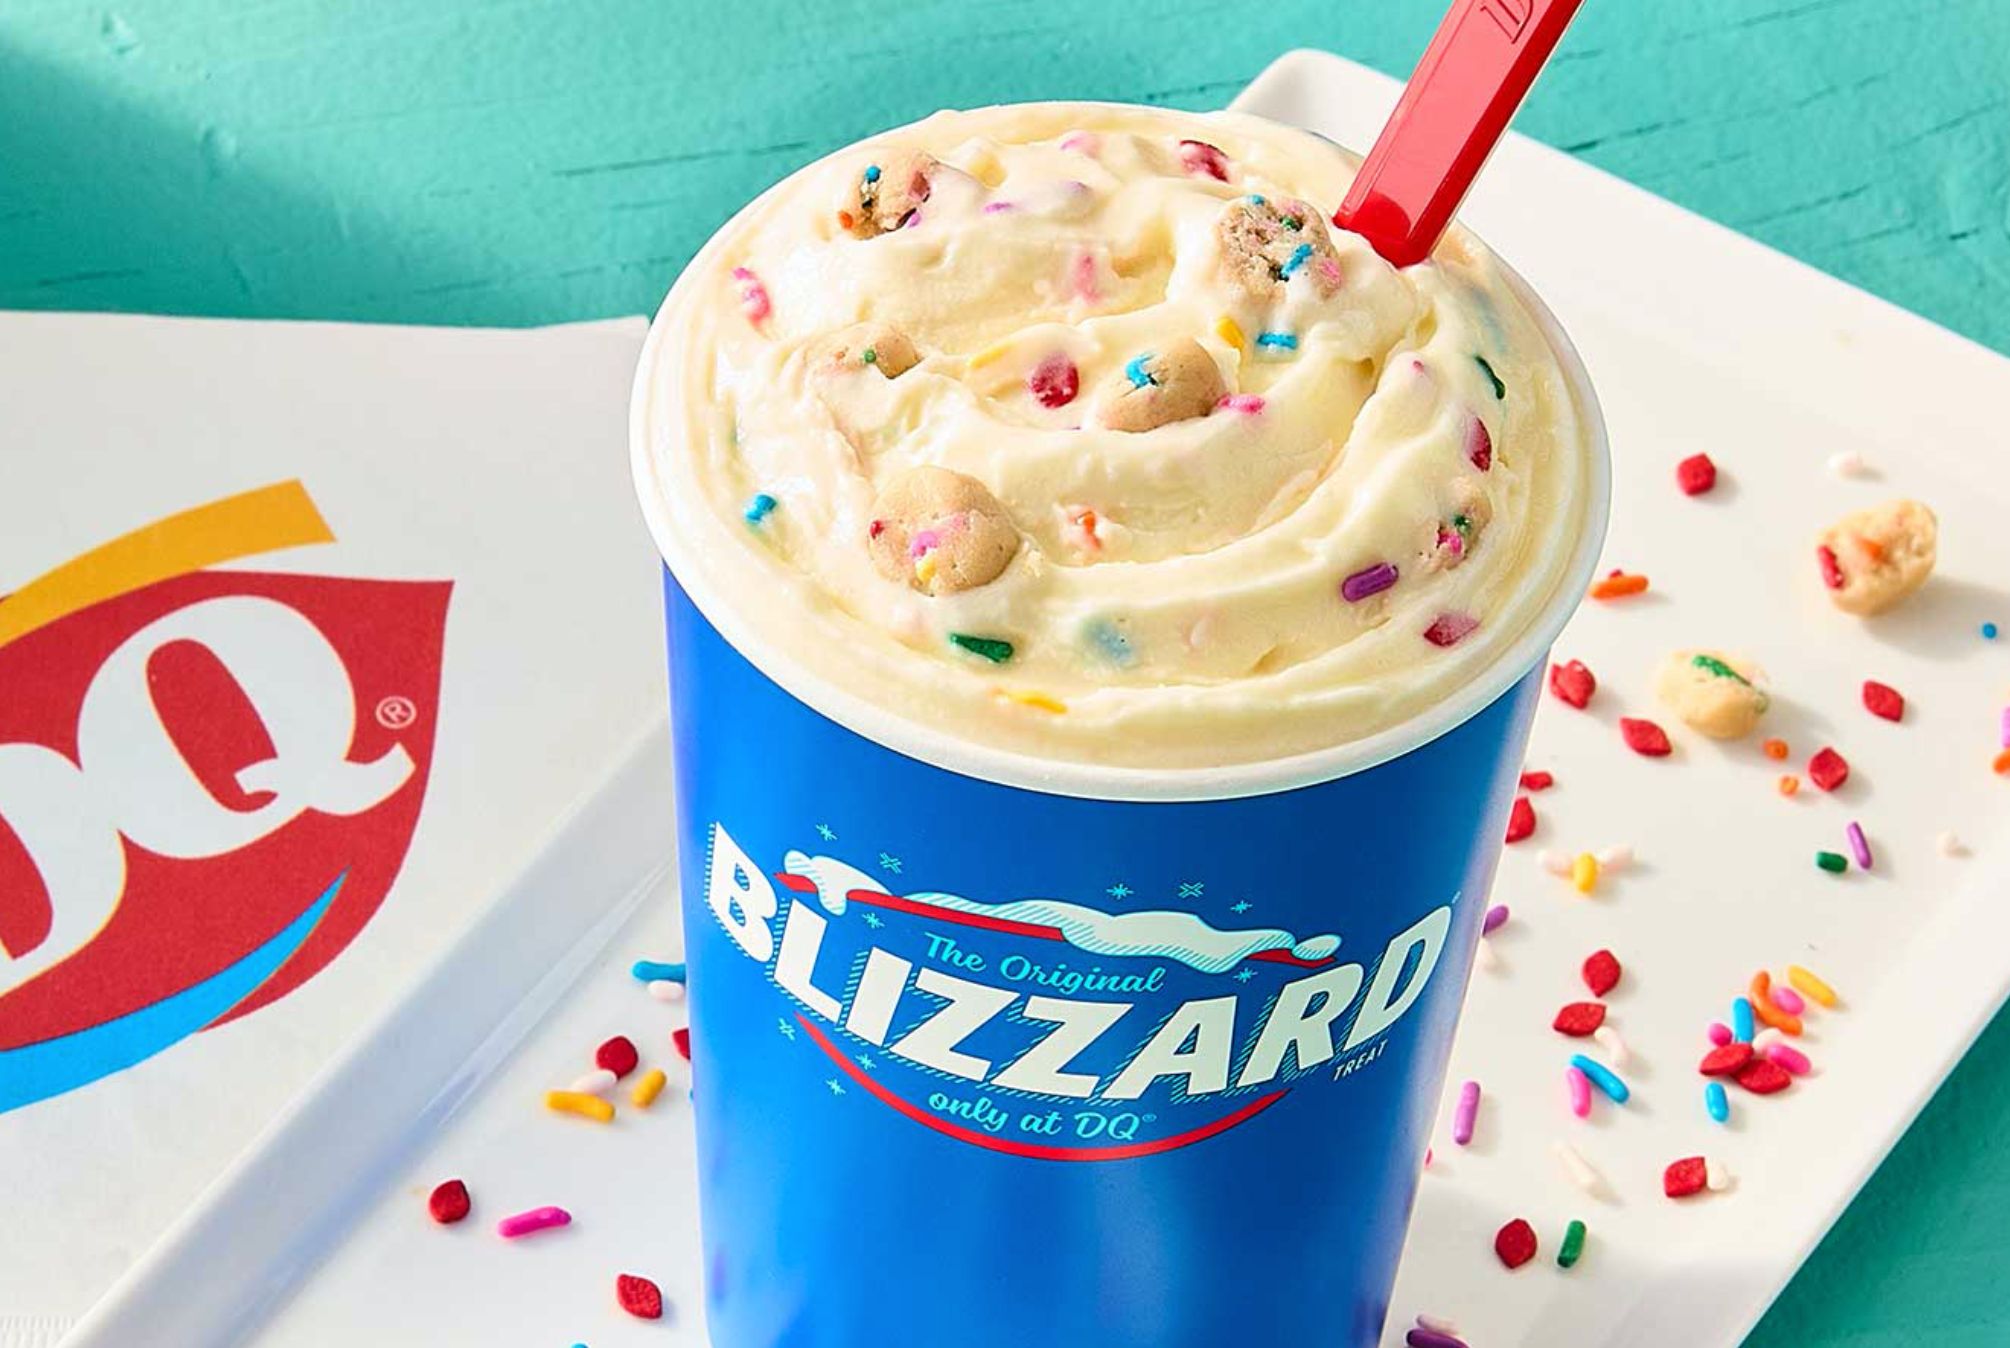 Cake Batter Cookie Dough Lands at Dairy Queen as July's Blizzard of the Month